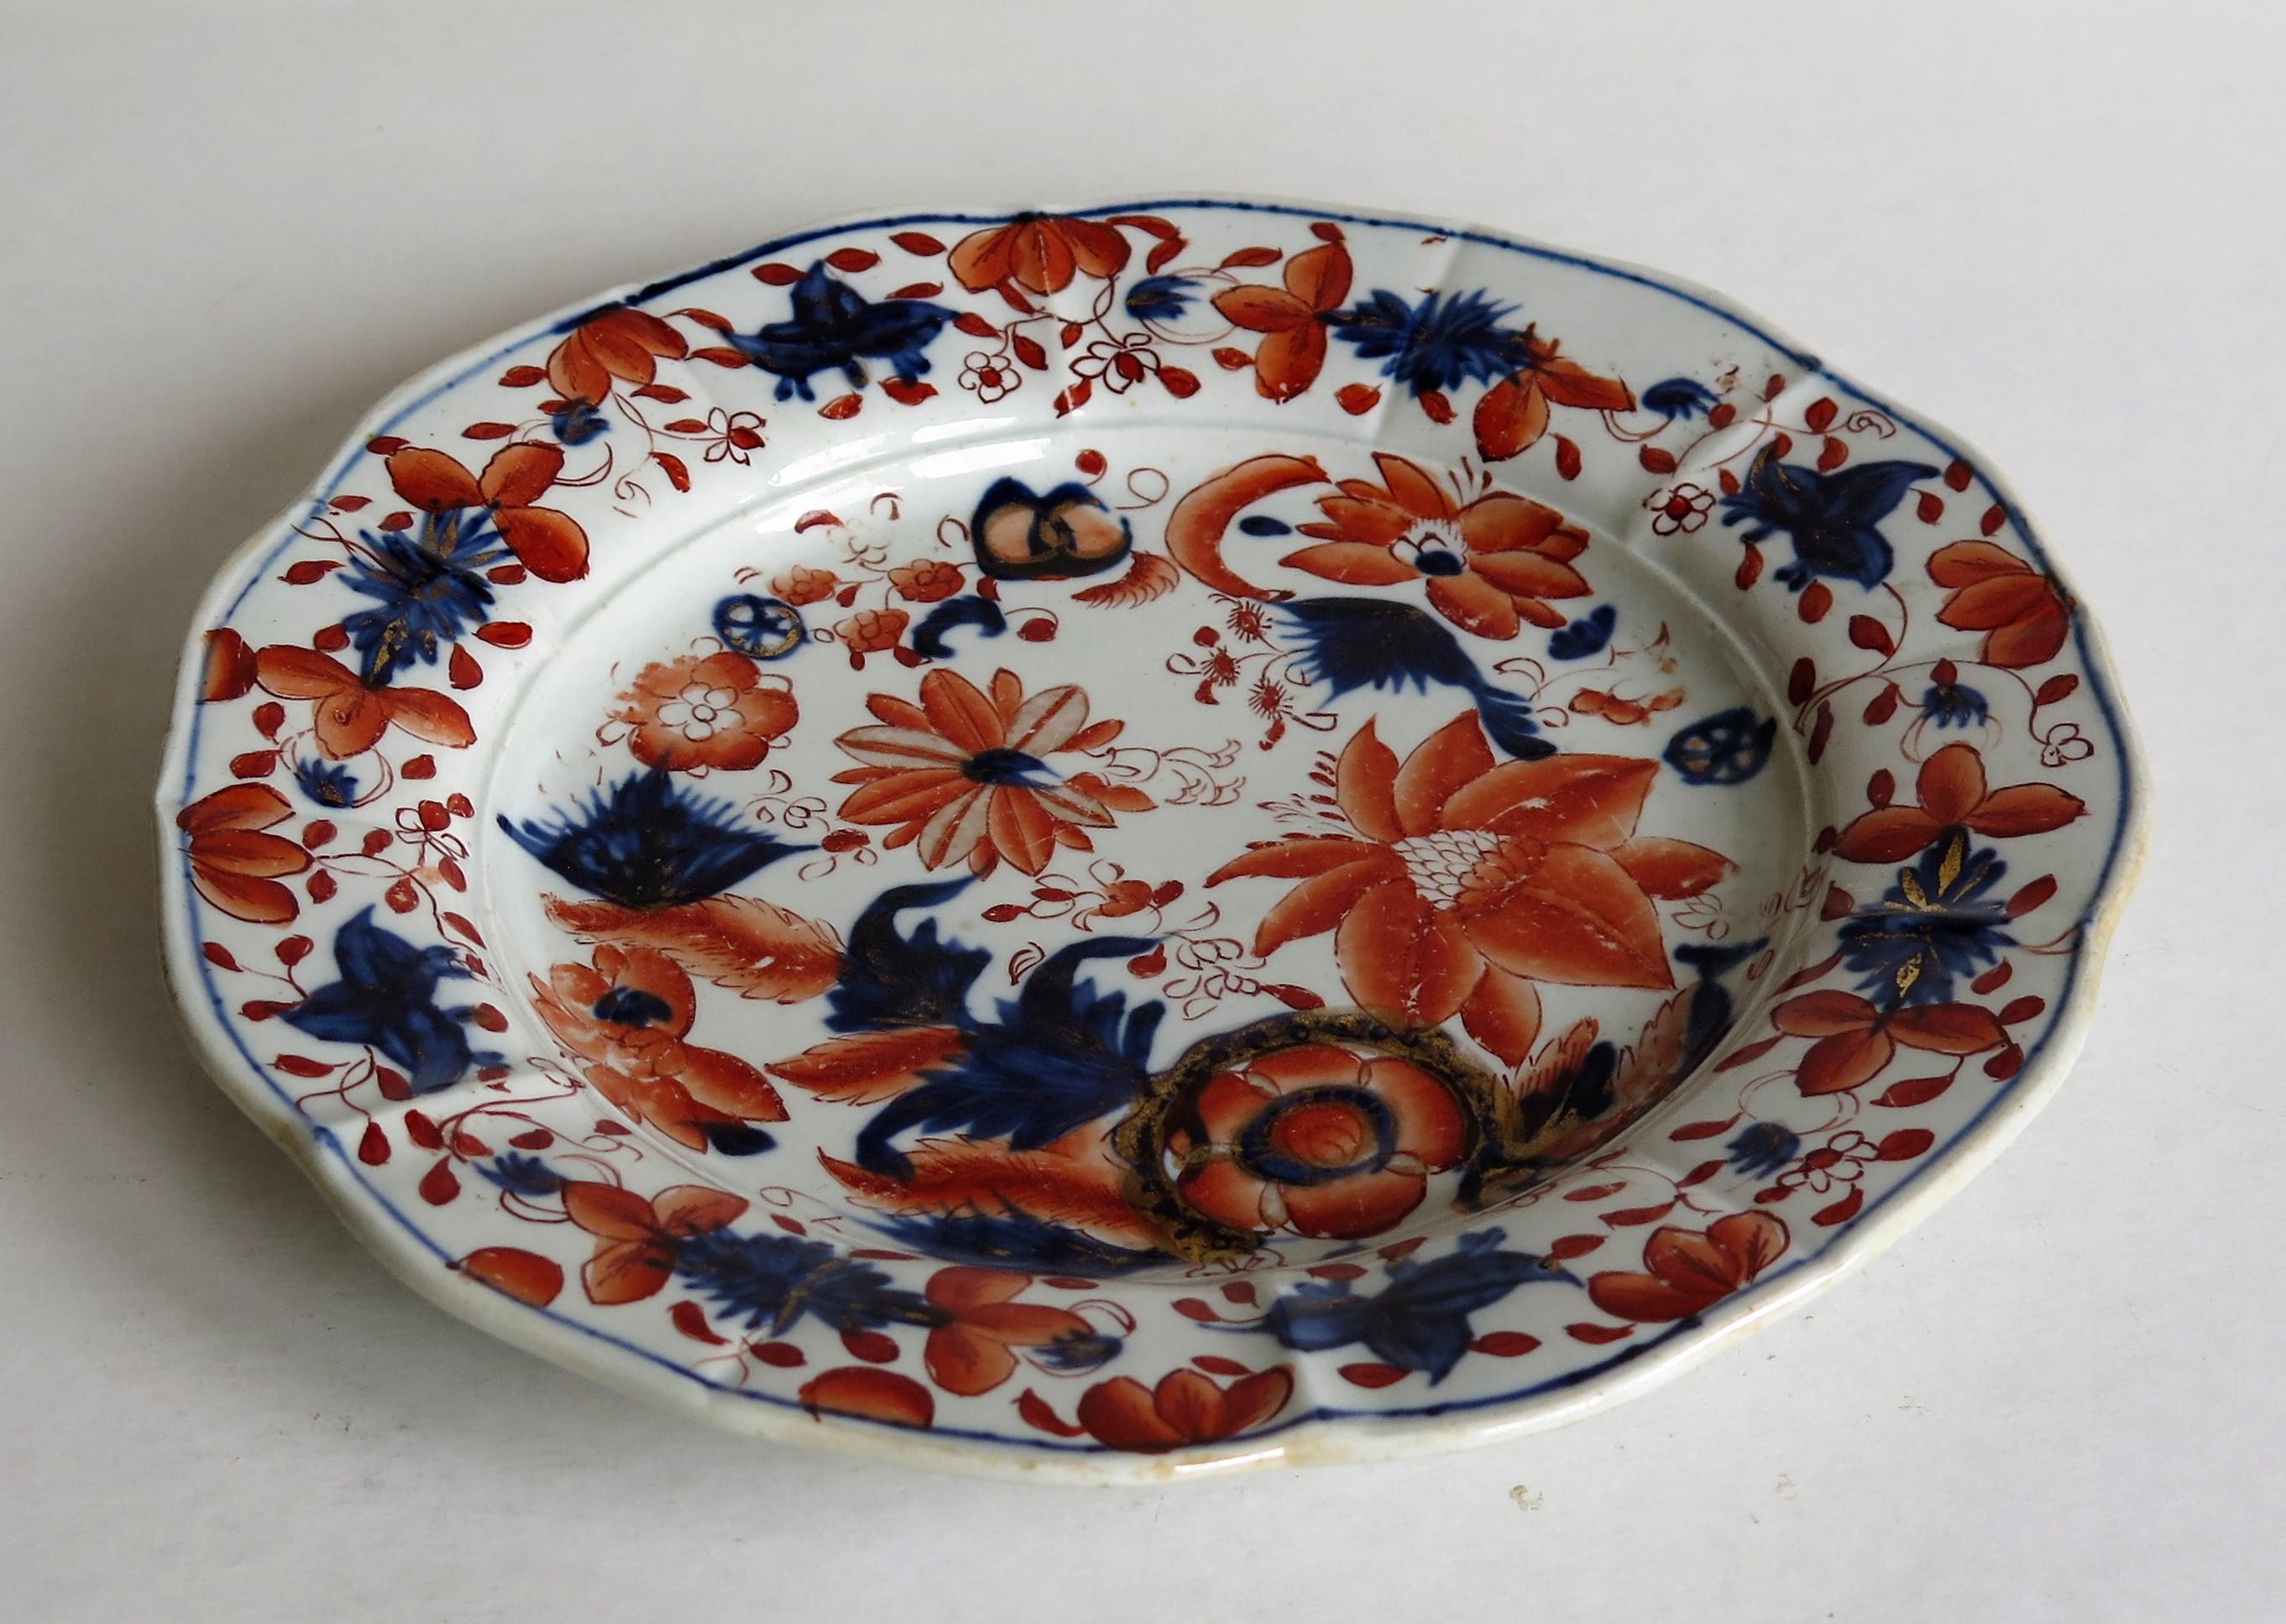 Hand-Painted Early Mason's Ironstone Dish or Plate Flowers and Wheels Rare Pattern Circa 1815